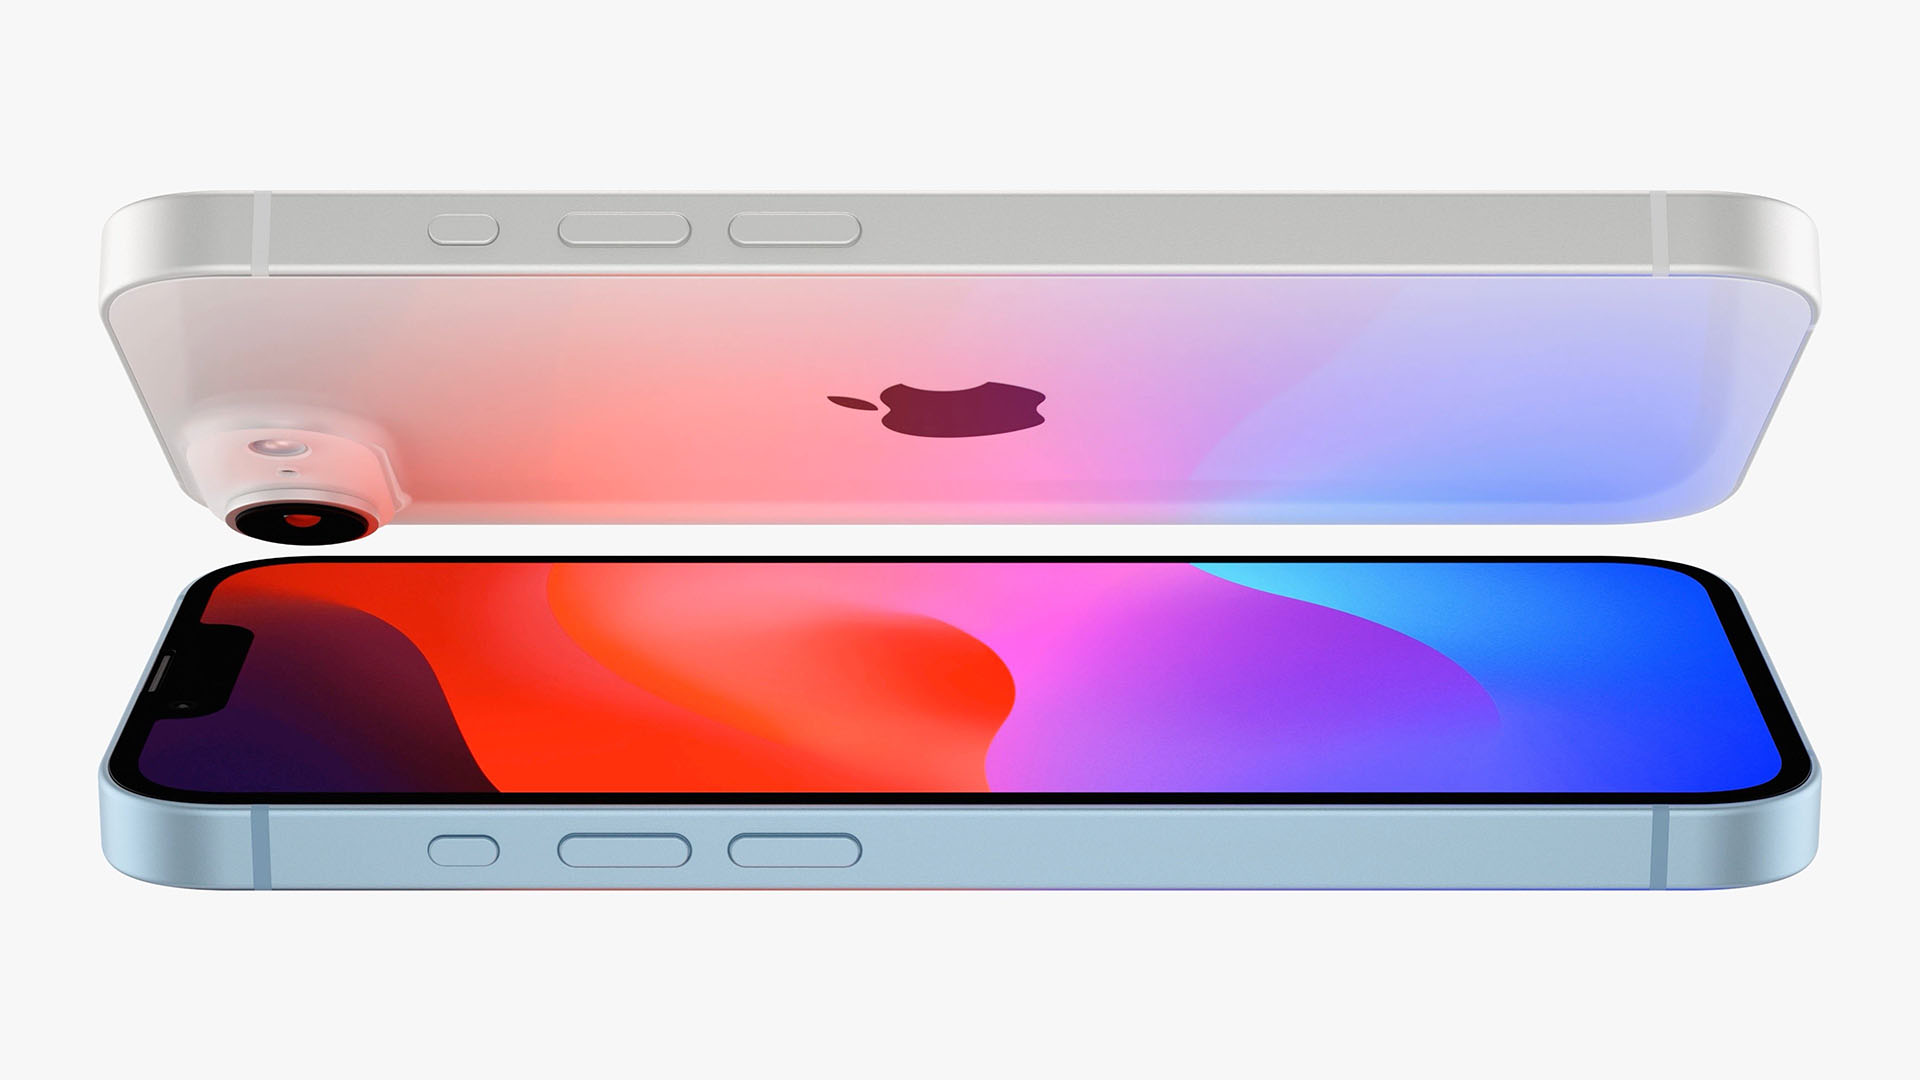 New iPhone SE 4 Rumors: Bigger Screen, Face ID, and Under $500